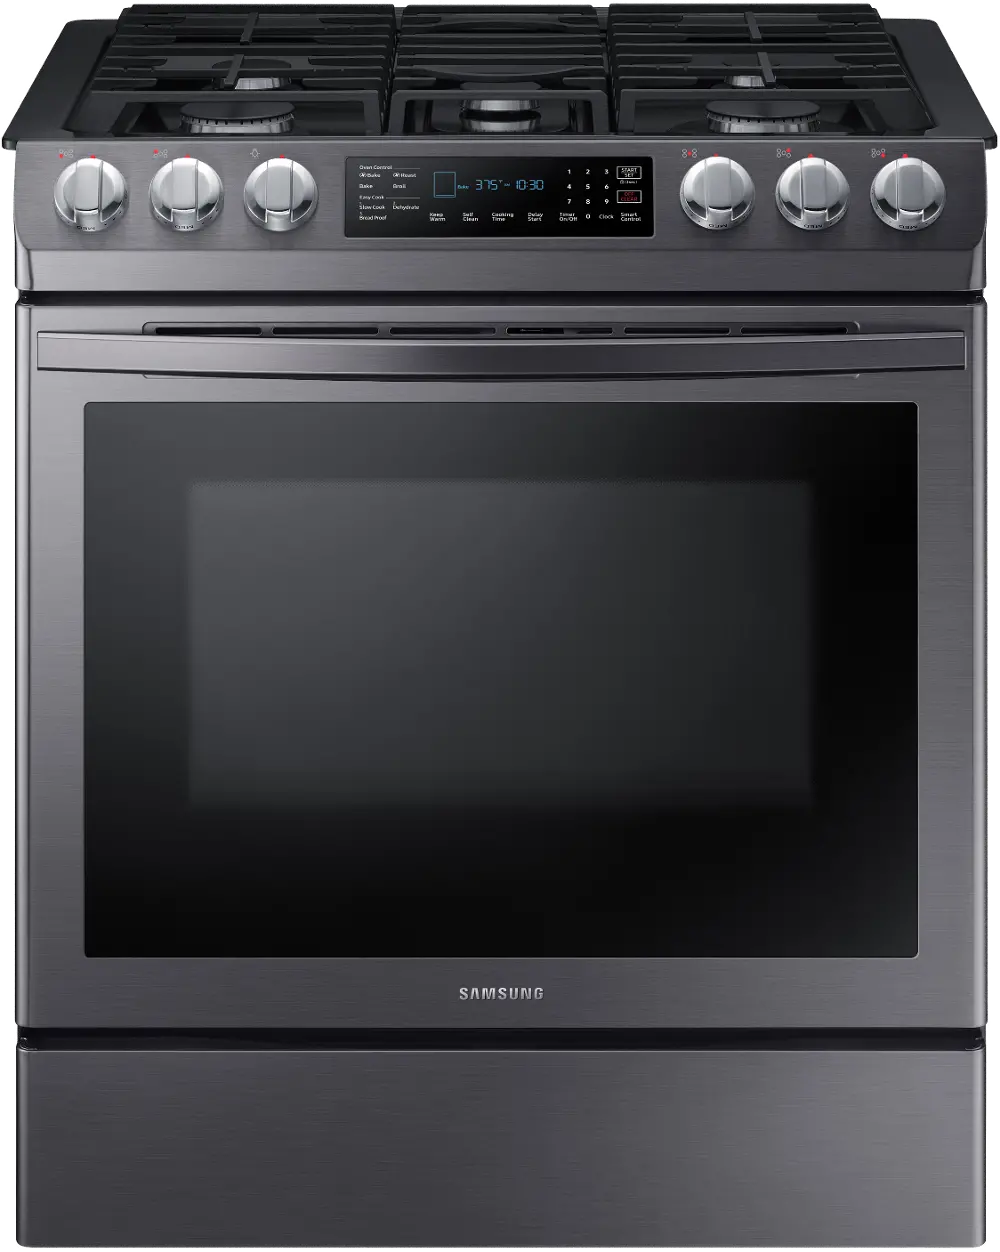 NX58R9421SG Samsung 30 Inch Slide In Gas Range with Convection - 5.8 cu. ft. Black Stainless Steel-1